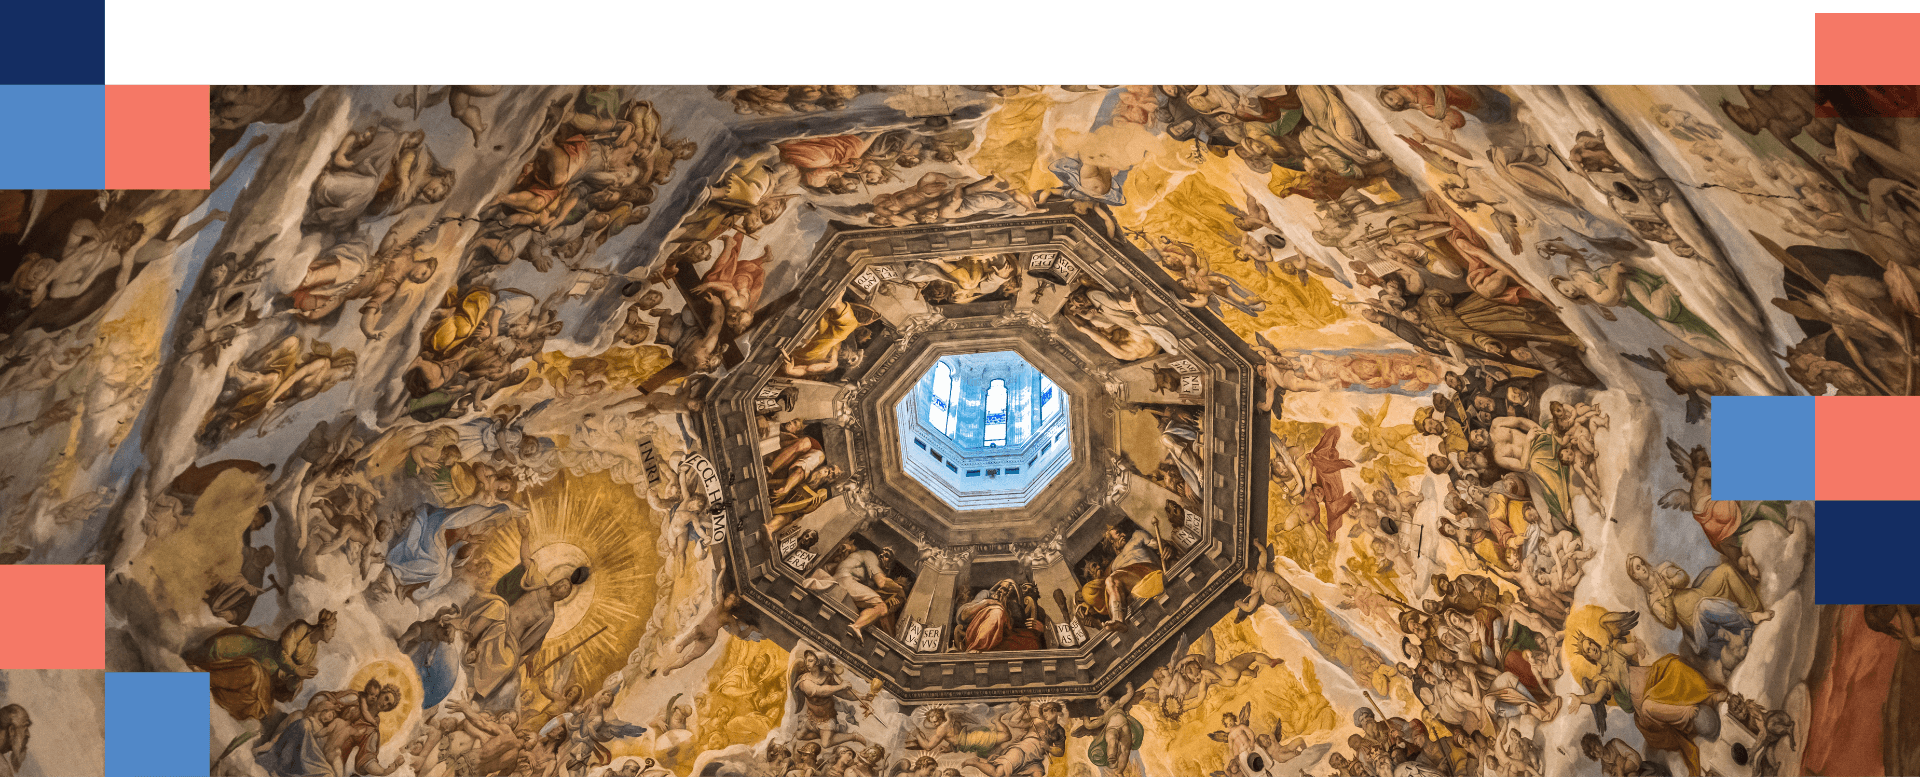 Frescoes in the dome of the Florence Cathedral